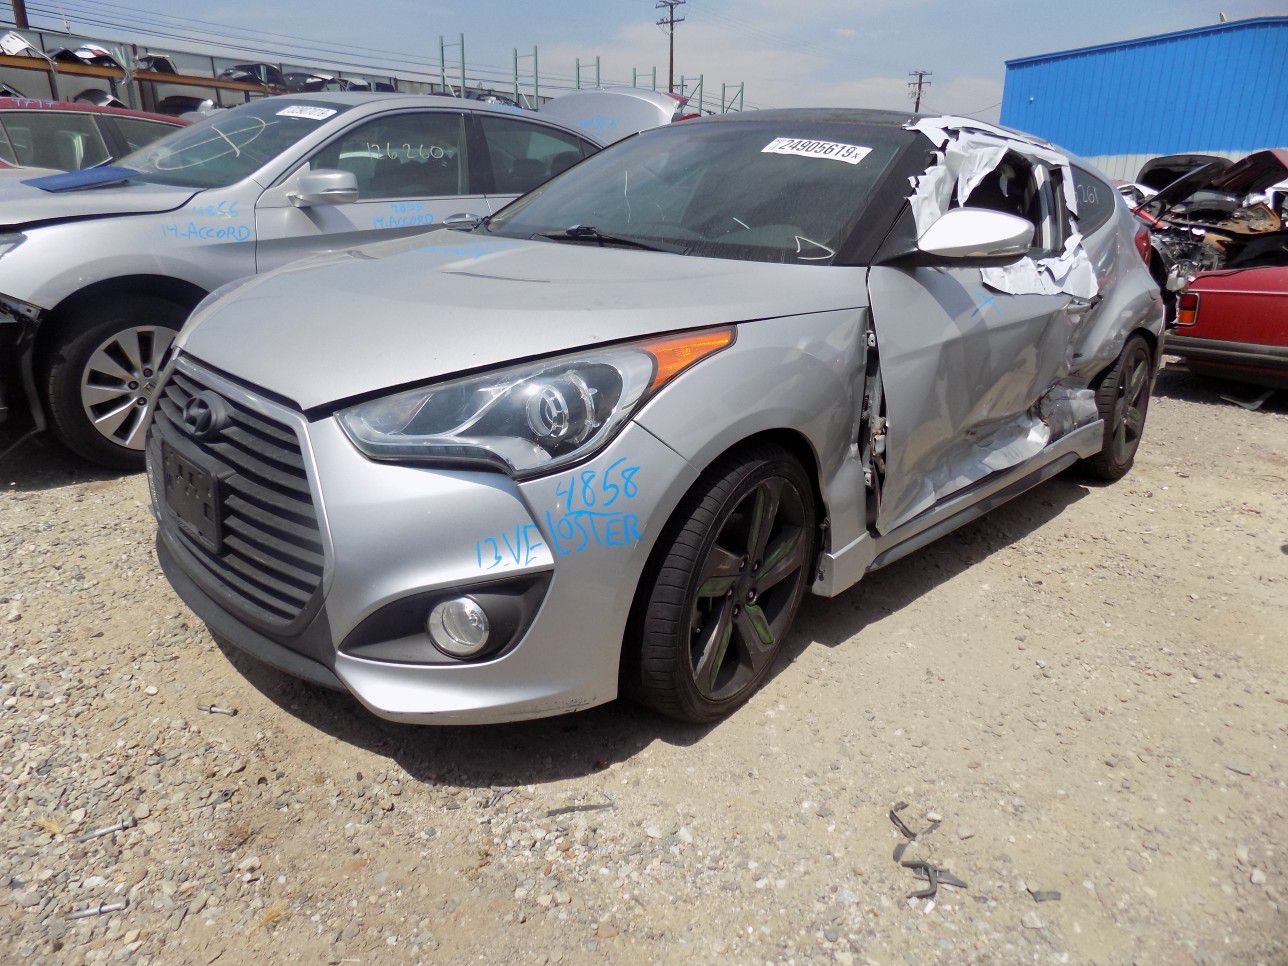 2013 Hyundai Veloster 1.6L (PARTING OUT)